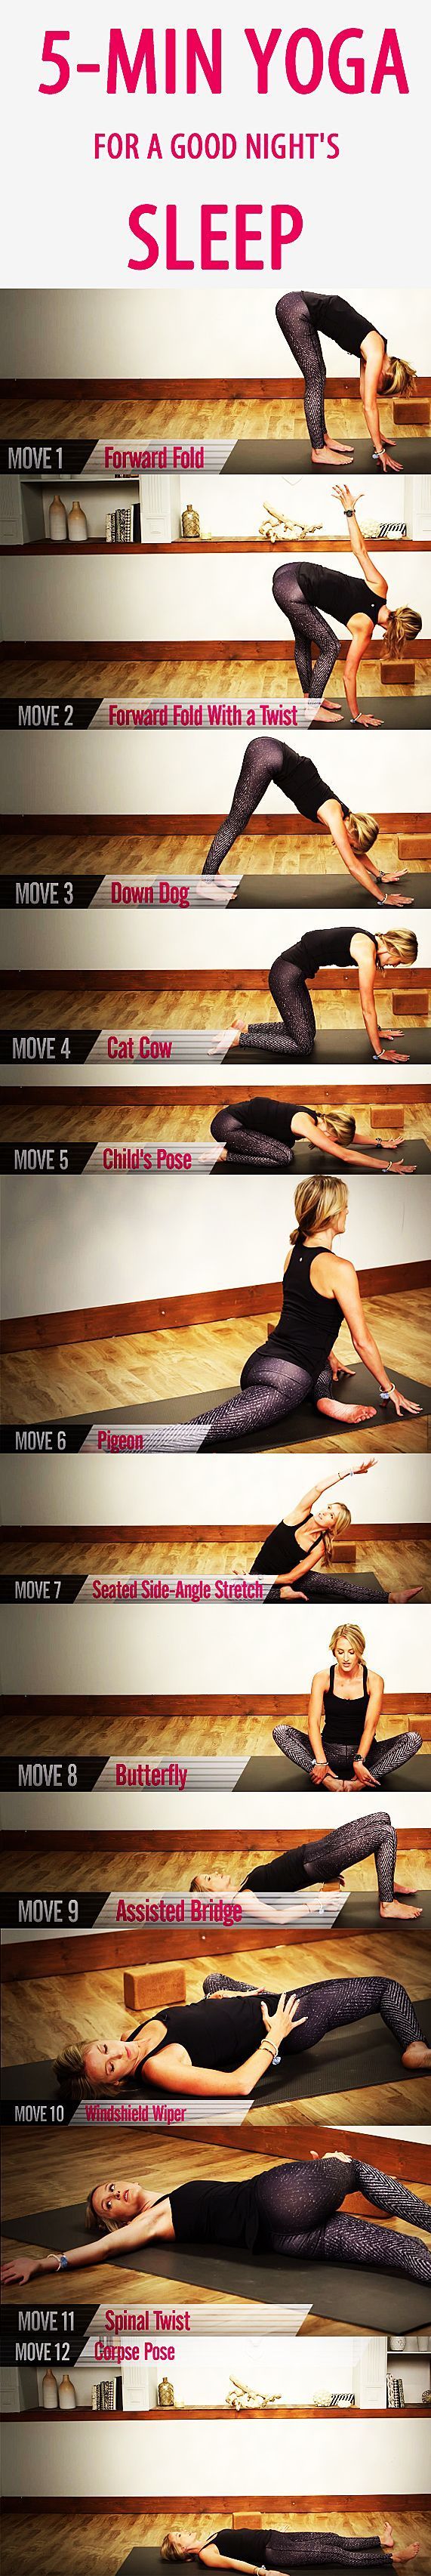 Equestrians & Everyone! Here’s a 5 minute Yoga routine for a great night’s sleep. Sometimes you have to ac